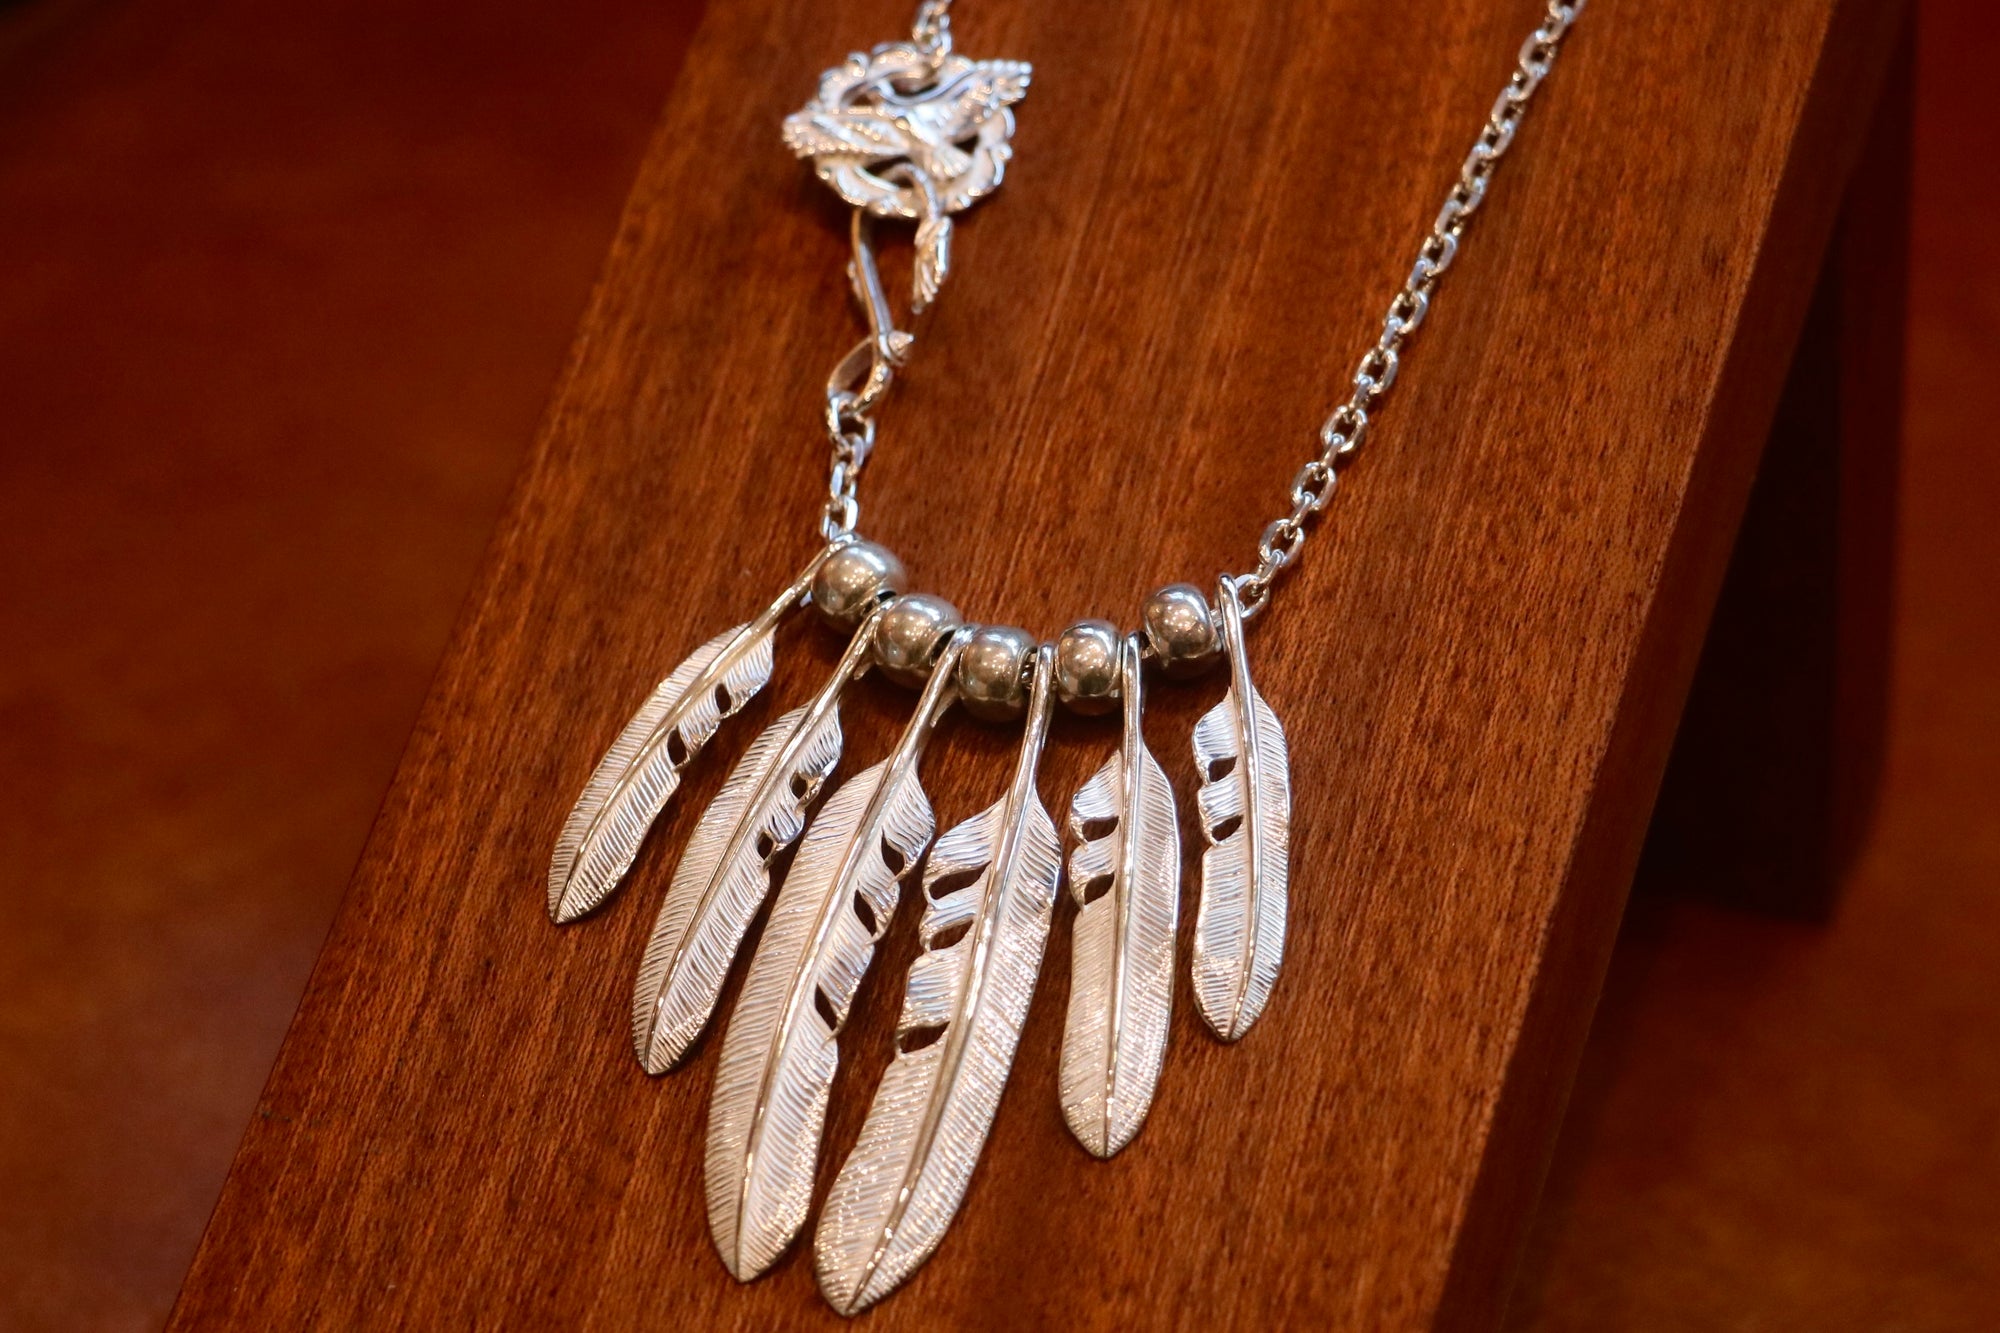 Silver Dollar Craft 925 Silver Feather Pendant M